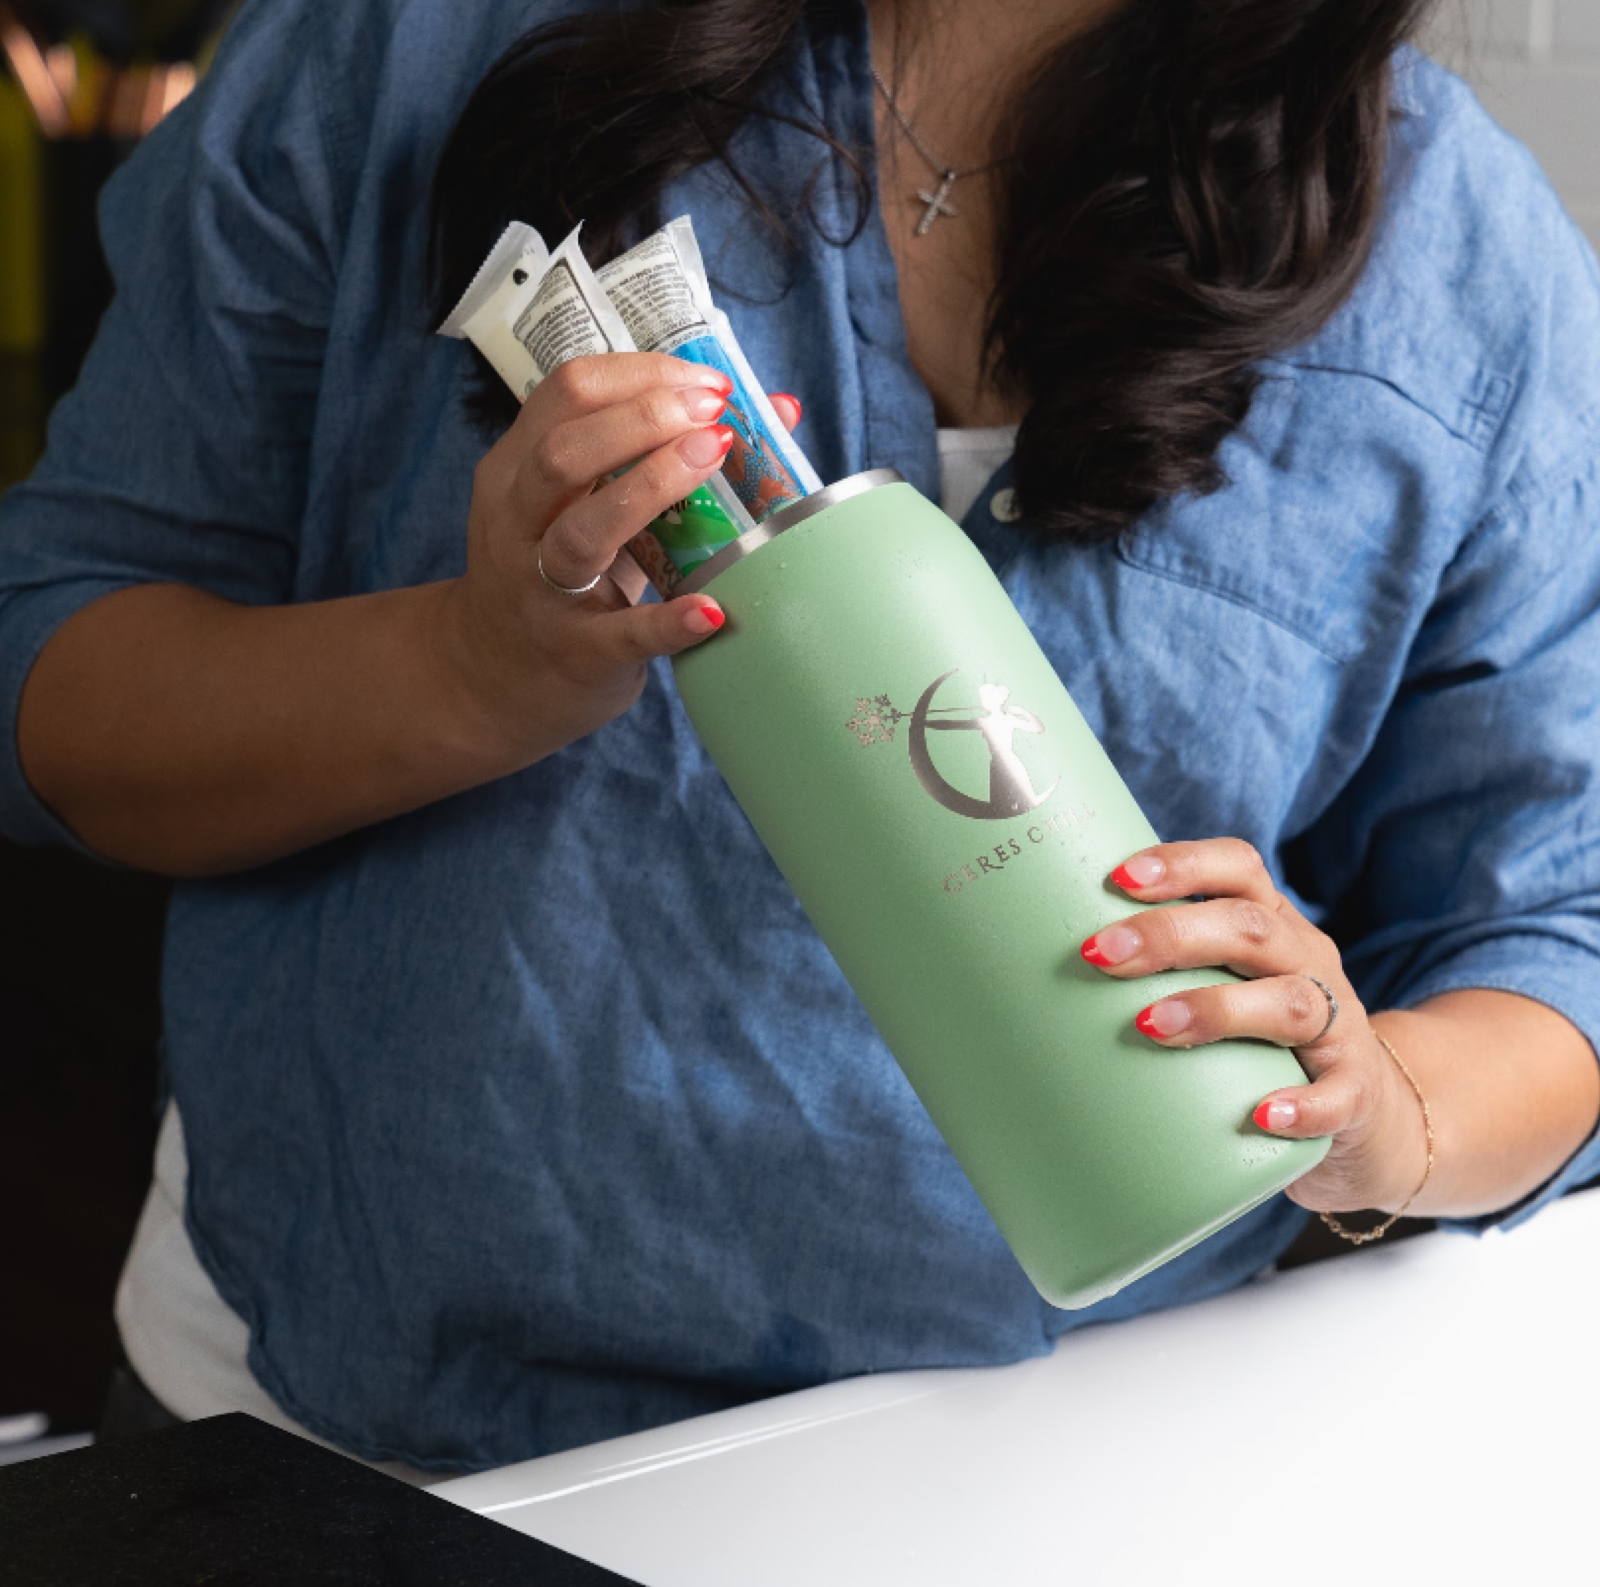 Breastmilk Chiller Reusable Storage Container by CERES CHILL | Cooler -  Keeps Milk at Safe temperatures for 20+ Hours | Bottle Connects w/Most  Major